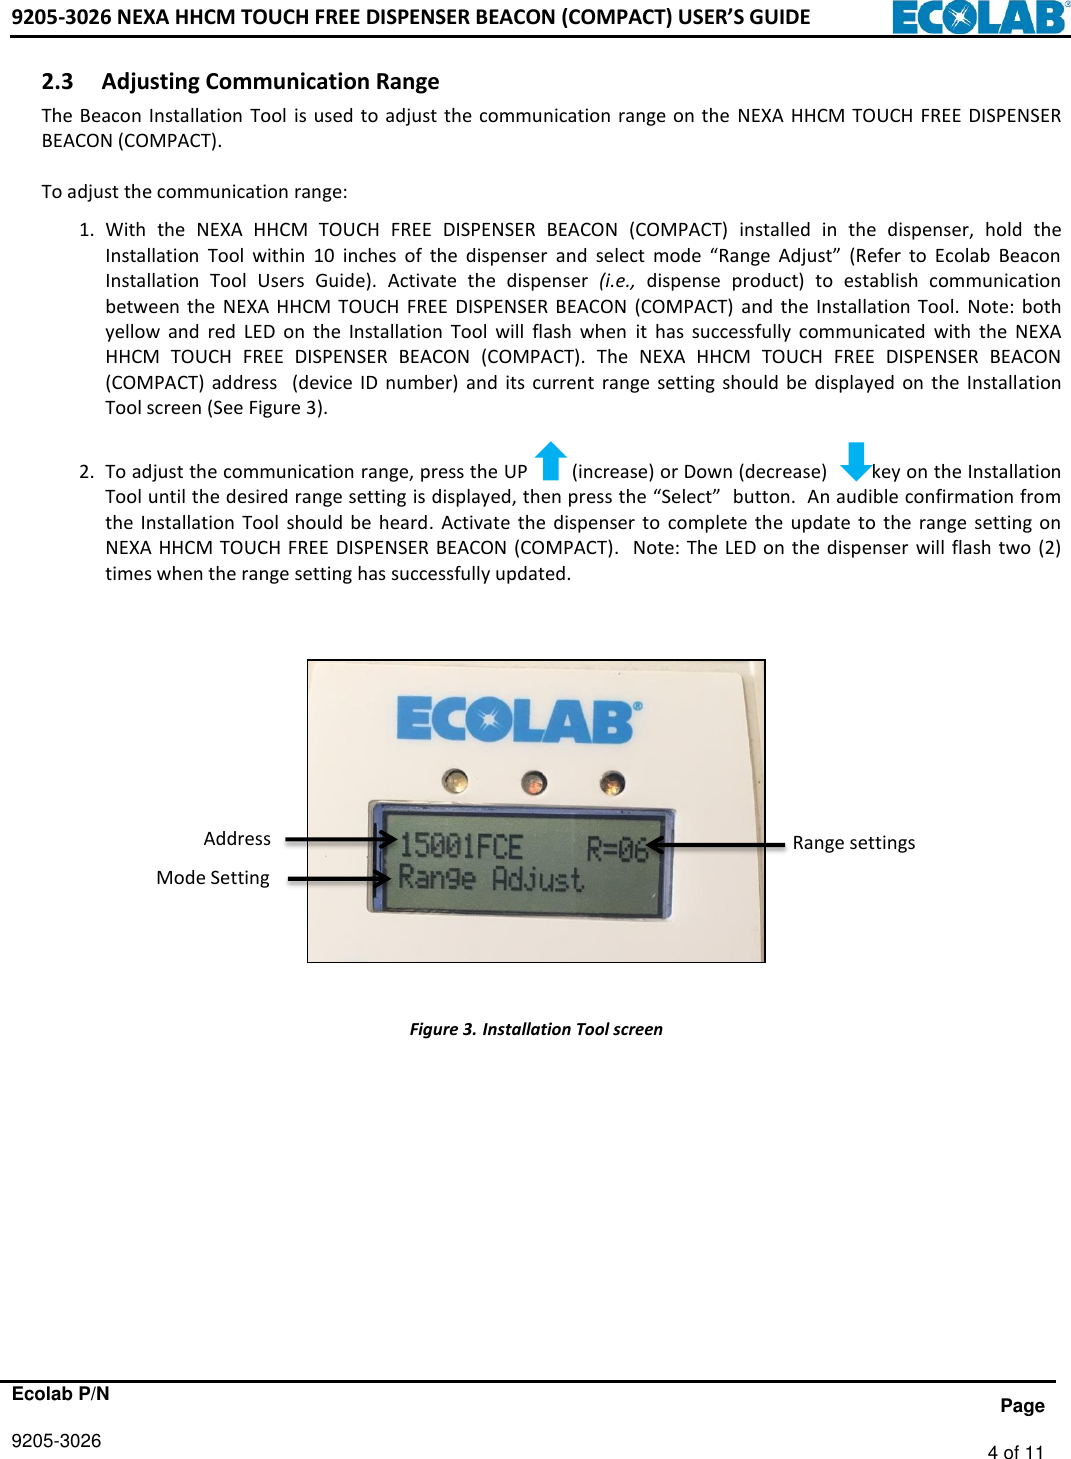 9205-3026 NEXA HHCM TOUCH FREE DISPENSER BEACON (COMPACT) USER’S GUIDE      Ecolab P/N                 Page 9205-3026   4 of 11   2.3 Adjusting Communication Range  The Beacon Installation  Tool is used to adjust the communication  range  on  the  NEXA  HHCM  TOUCH  FREE DISPENSER BEACON (COMPACT).   To adjust the communication range:   1. With  the  NEXA  HHCM  TOUCH  FREE  DISPENSER  BEACON  (COMPACT)  installed  in  the  dispenser,  hold  the Installation  Tool  within  10  inches  of  the  dispenser  and  select  mode  “Range  Adjust”  (Refer  to  Ecolab  Beacon Installation  Tool  Users  Guide).  Activate  the  dispenser  (i.e., dispense  product)  to  establish  communication between  the  NEXA HHCM  TOUCH FREE  DISPENSER  BEACON  (COMPACT)  and  the Installation  Tool.  Note:  both yellow  and  red  LED  on  the  Installation  Tool  will  flash  when  it  has  successfully  communicated  with  the  NEXA HHCM  TOUCH  FREE  DISPENSER  BEACON  (COMPACT).  The  NEXA  HHCM  TOUCH  FREE  DISPENSER  BEACON (COMPACT)  address    (device  ID  number)  and  its current  range  setting  should  be  displayed  on  the  Installation Tool screen (See Figure 3).   2. To adjust the communication range, press the UP        (increase) or Down (decrease)        key on the Installation Tool until the desired range setting is displayed, then press the “Select”  button.  An audible confirmation from the  Installation  Tool  should  be  heard.  Activate  the  dispenser  to  complete  the  update  to  the  range  setting  on NEXA HHCM TOUCH FREE DISPENSER BEACON (COMPACT).    Note: The LED on the dispenser  will flash two  (2) times when the range setting has successfully updated.                   Figure 3. Installation Tool screen             Range settings Address Mode Setting 